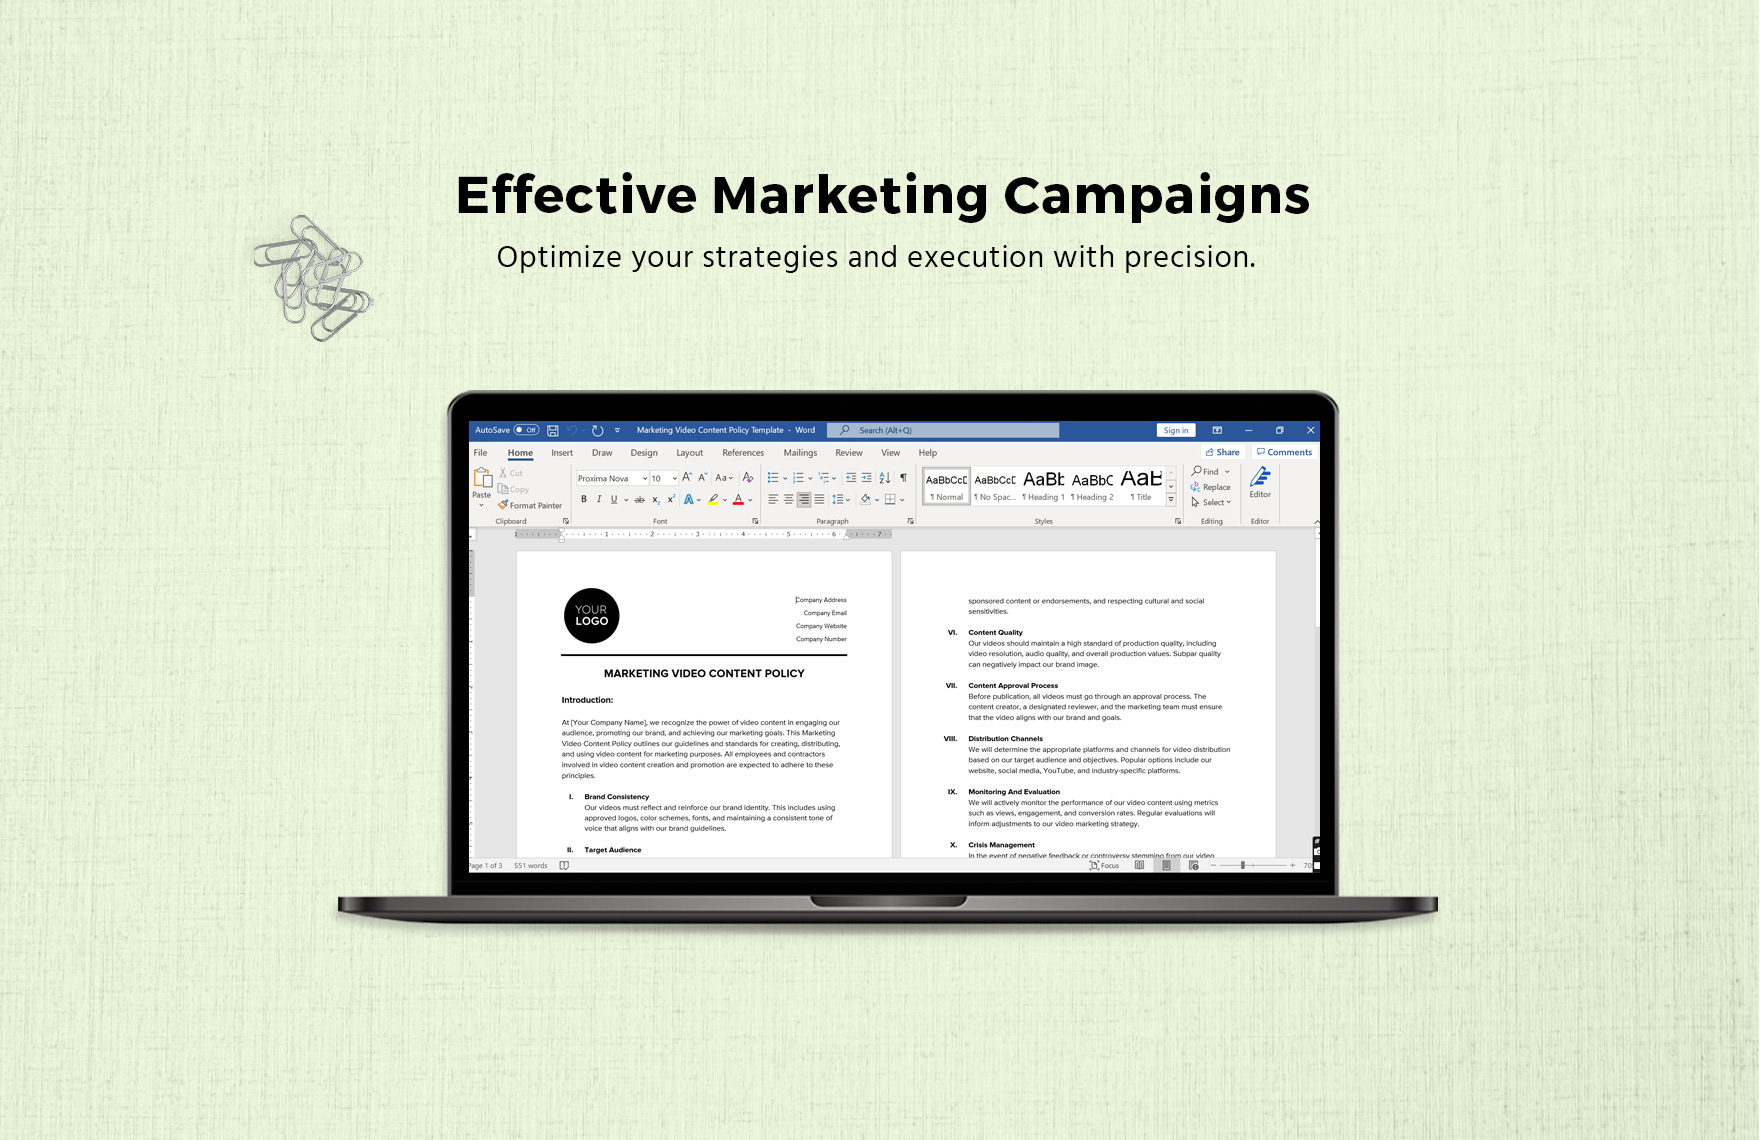 Marketing Video Content Policy Template